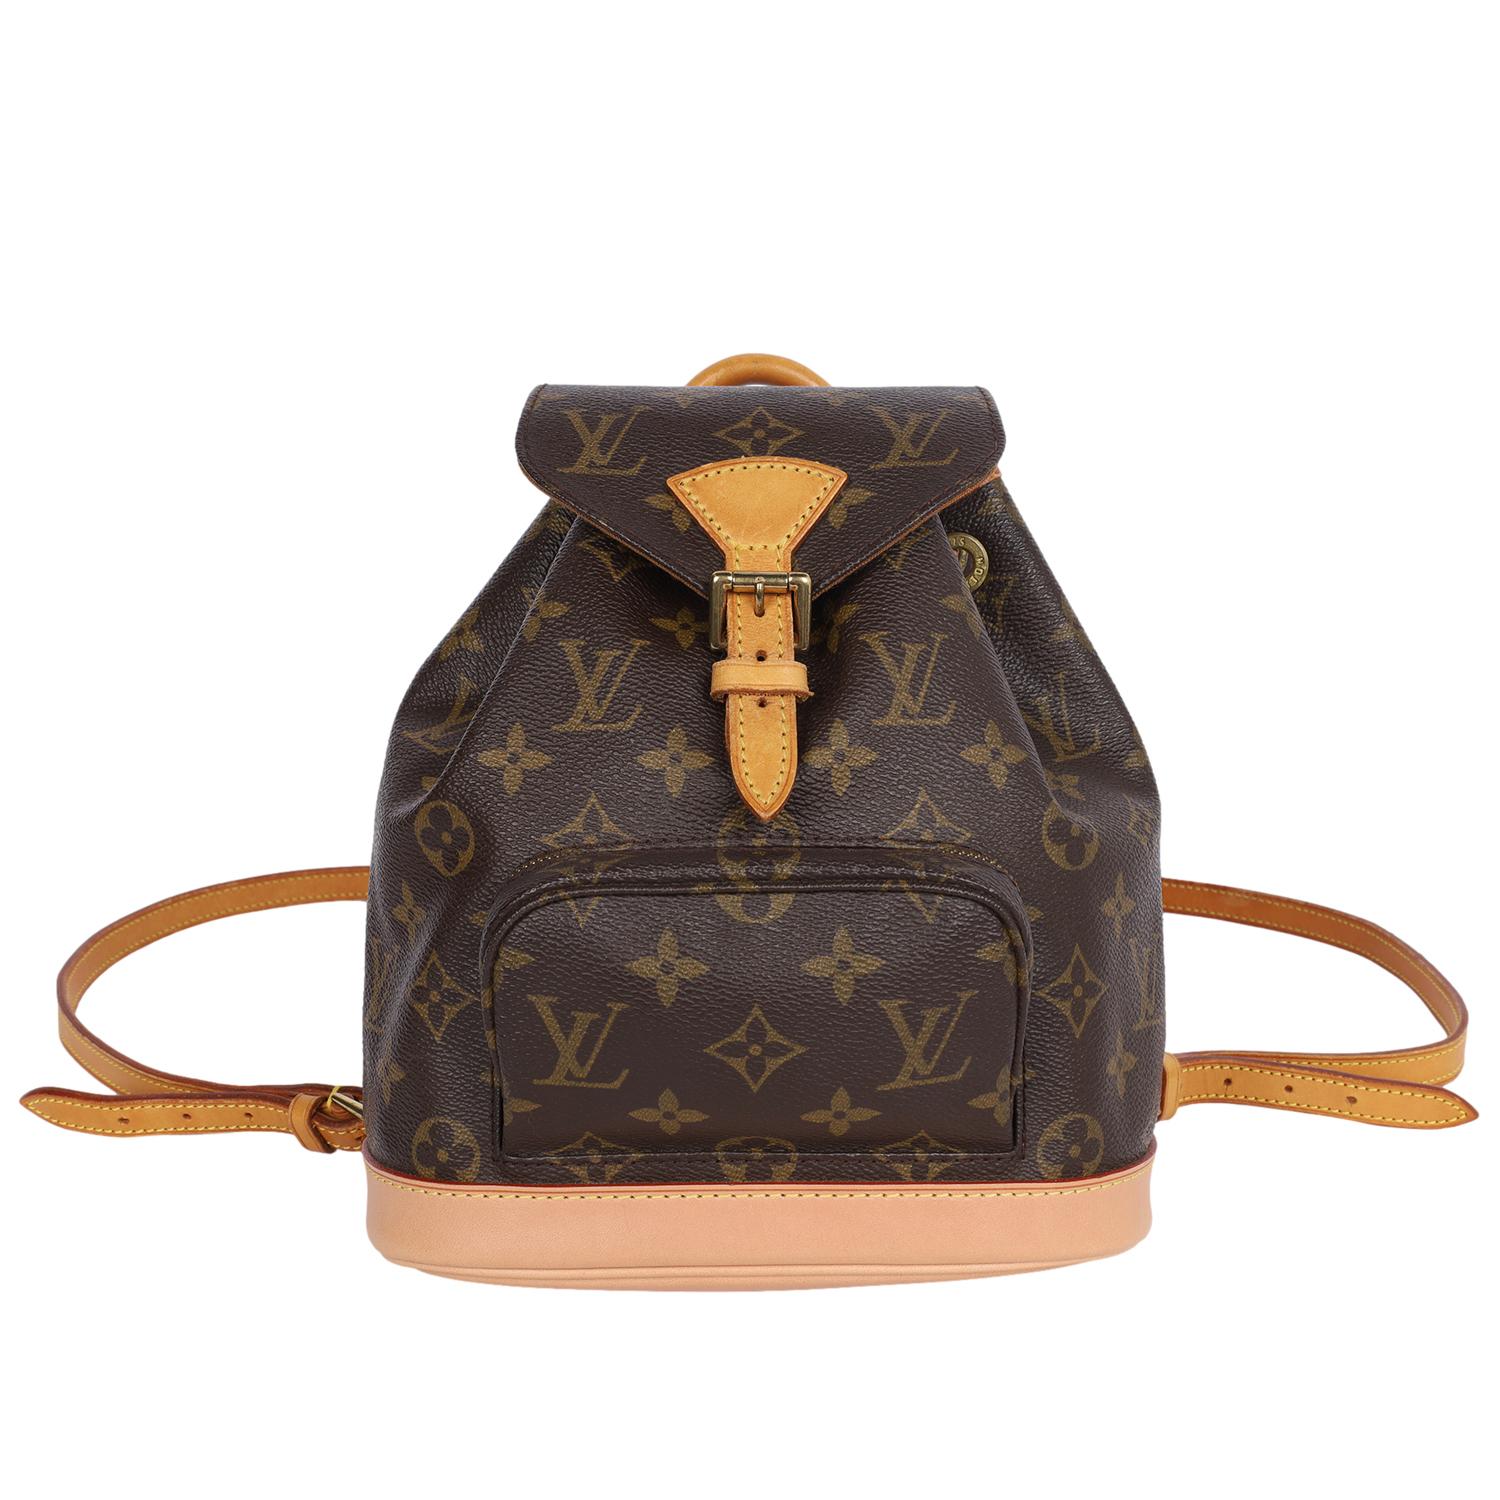 Authentic, pre-loved Louis Vuitton monogram Montsouris backpack Pm. Features monogram canvas with leather trim, front zippered pouch, top string closure with buckle front flap, the interior has a brown textile lining with d ring, adjustable shoulder